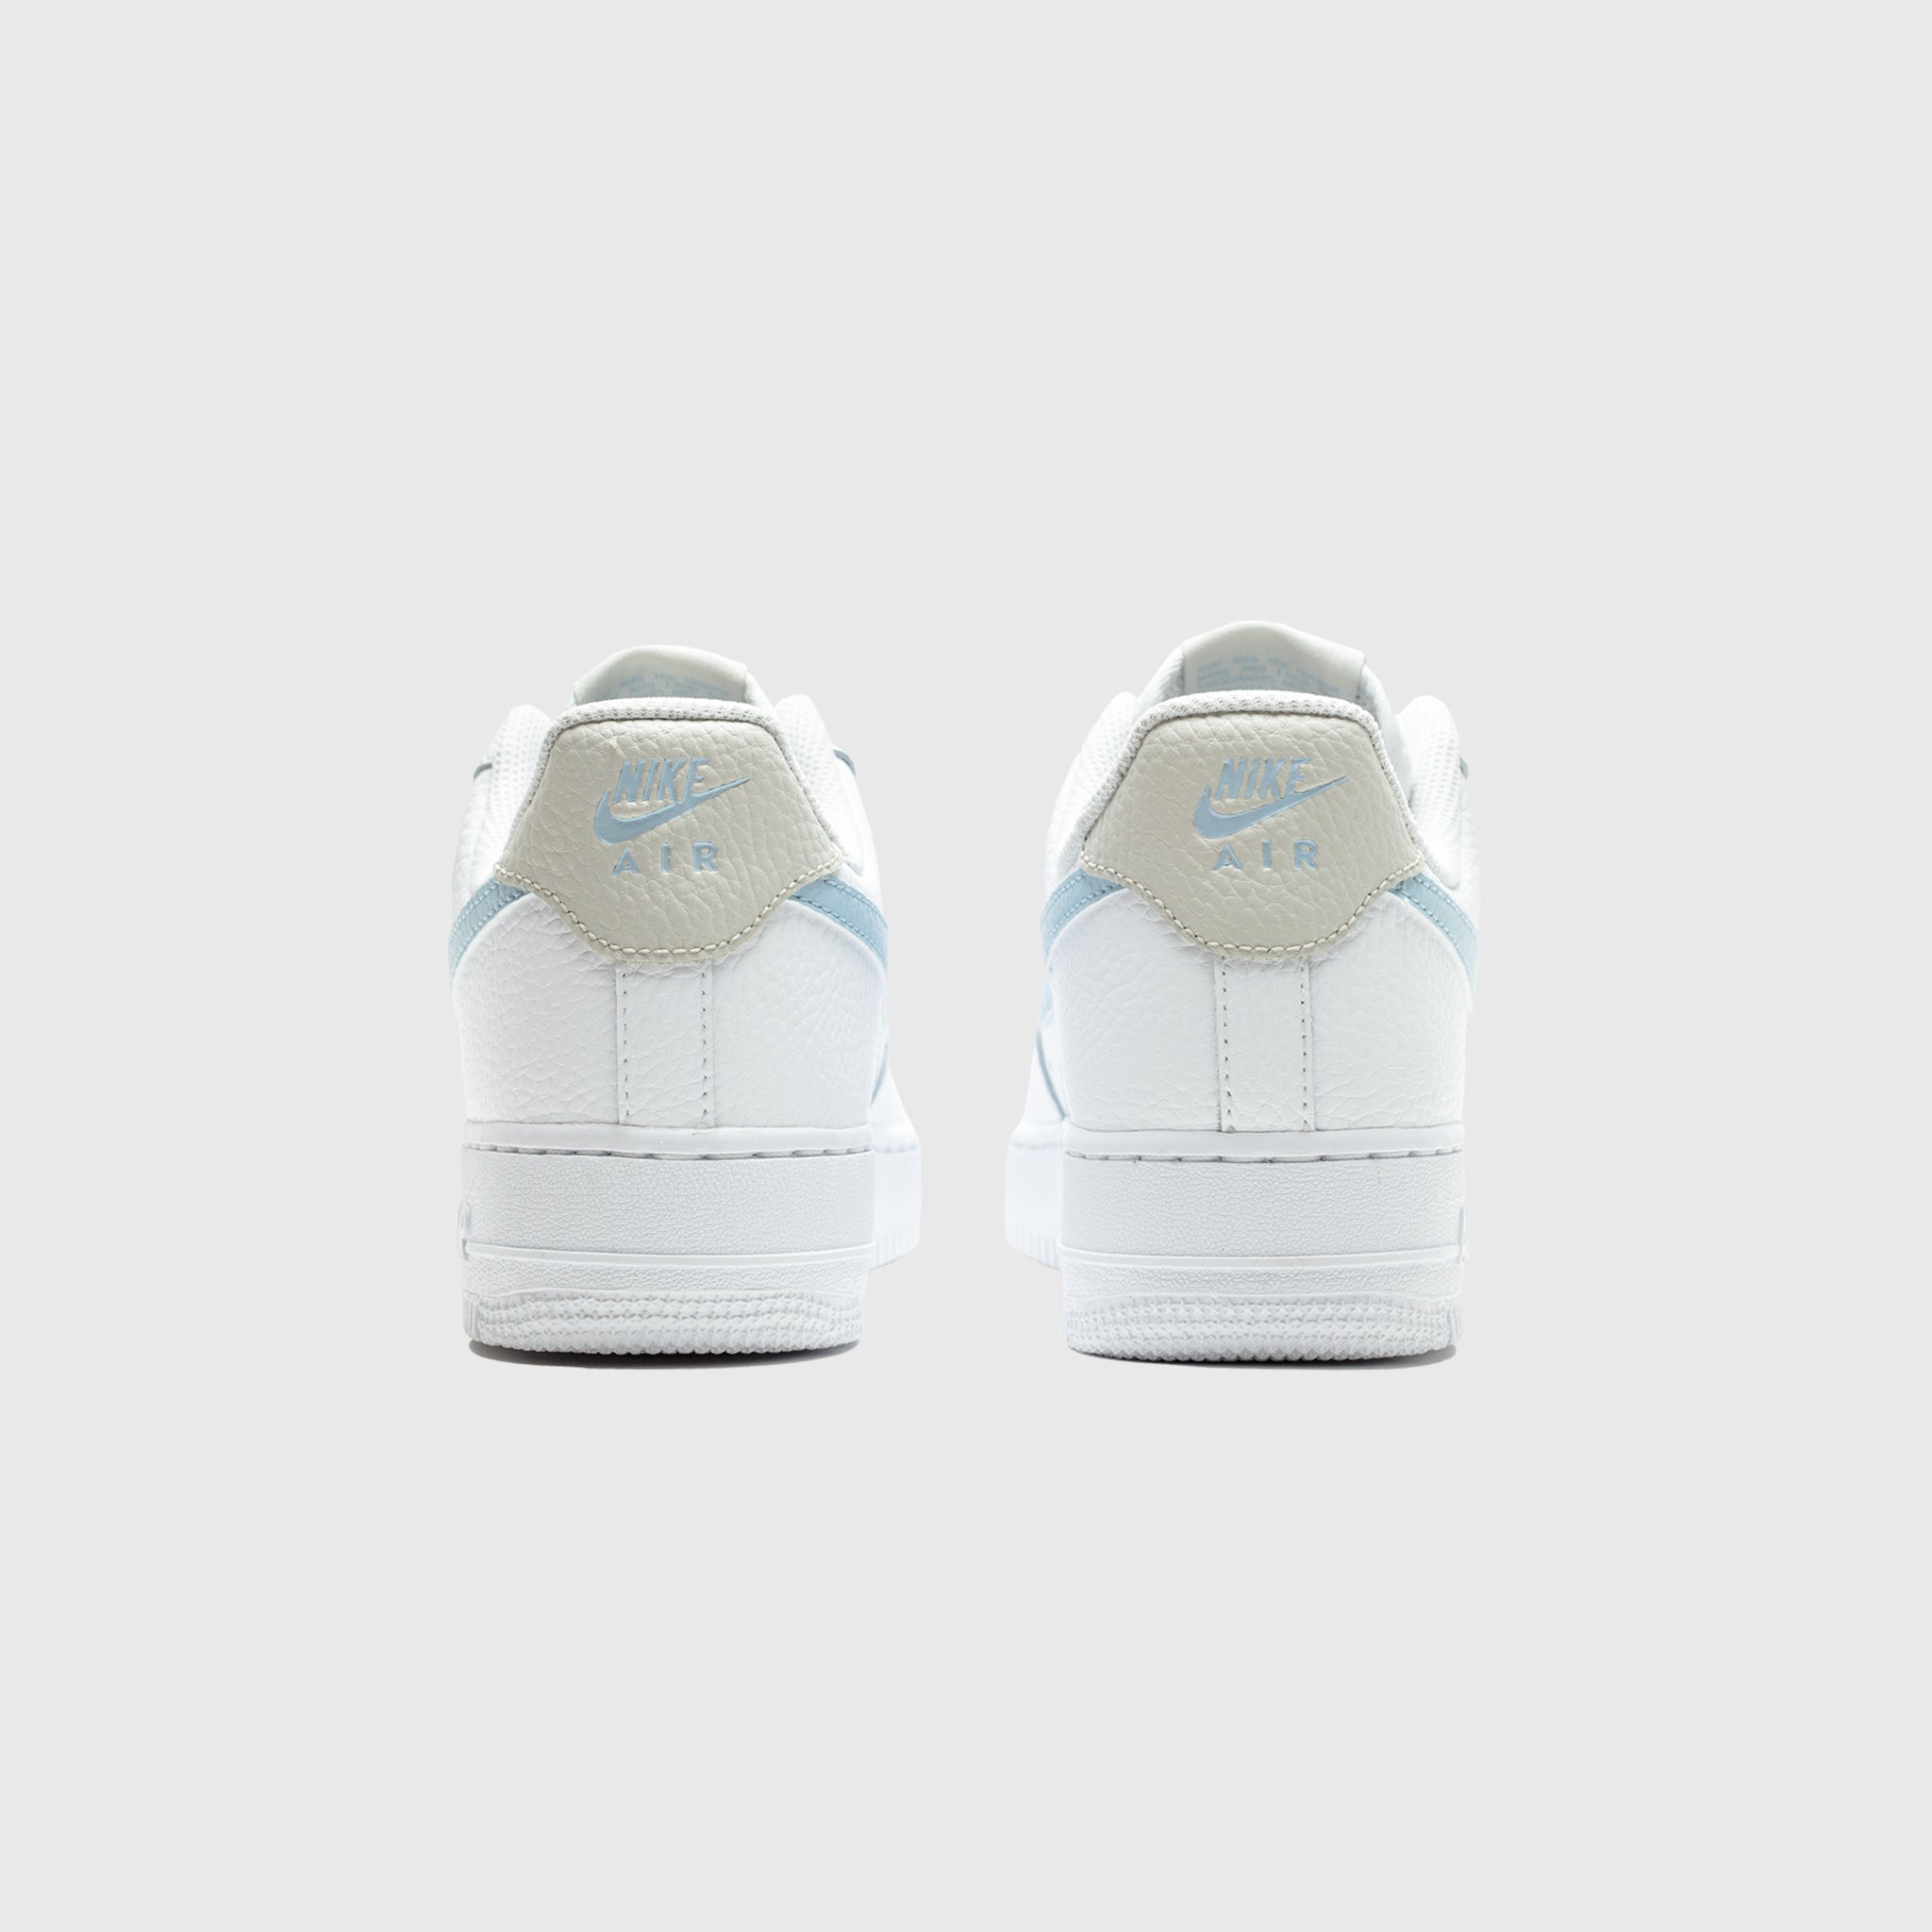 WMNS AIR FORCE 1 '07 "ARMORY BLUE"